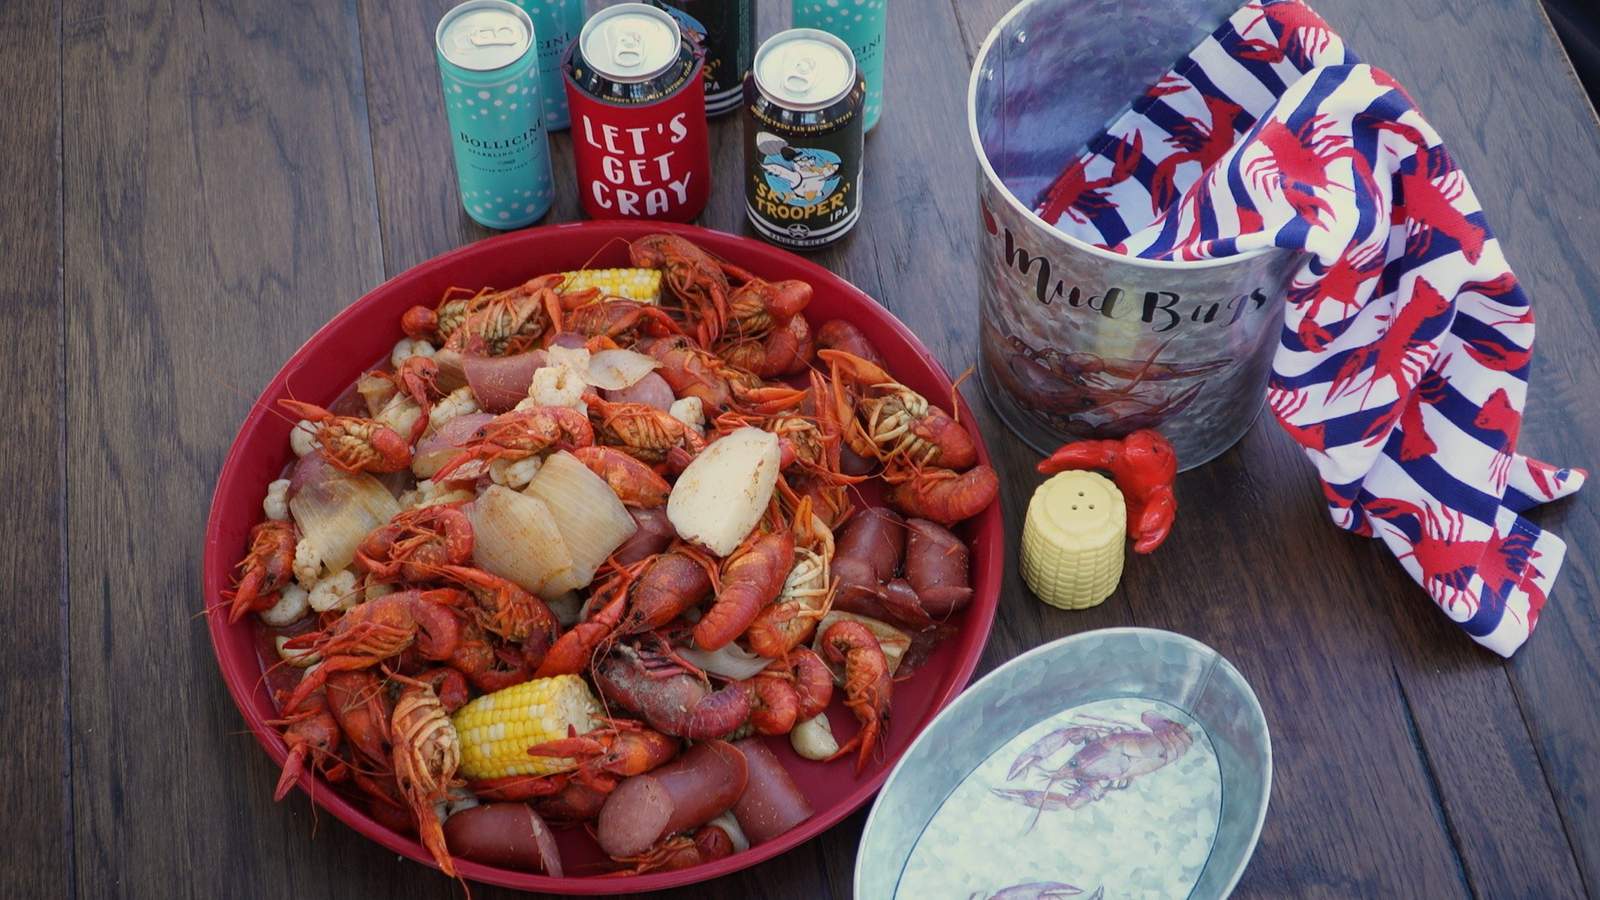 Eat all the crawfish you want at this upcoming event at Southern Star Brewing Co. in Conroe